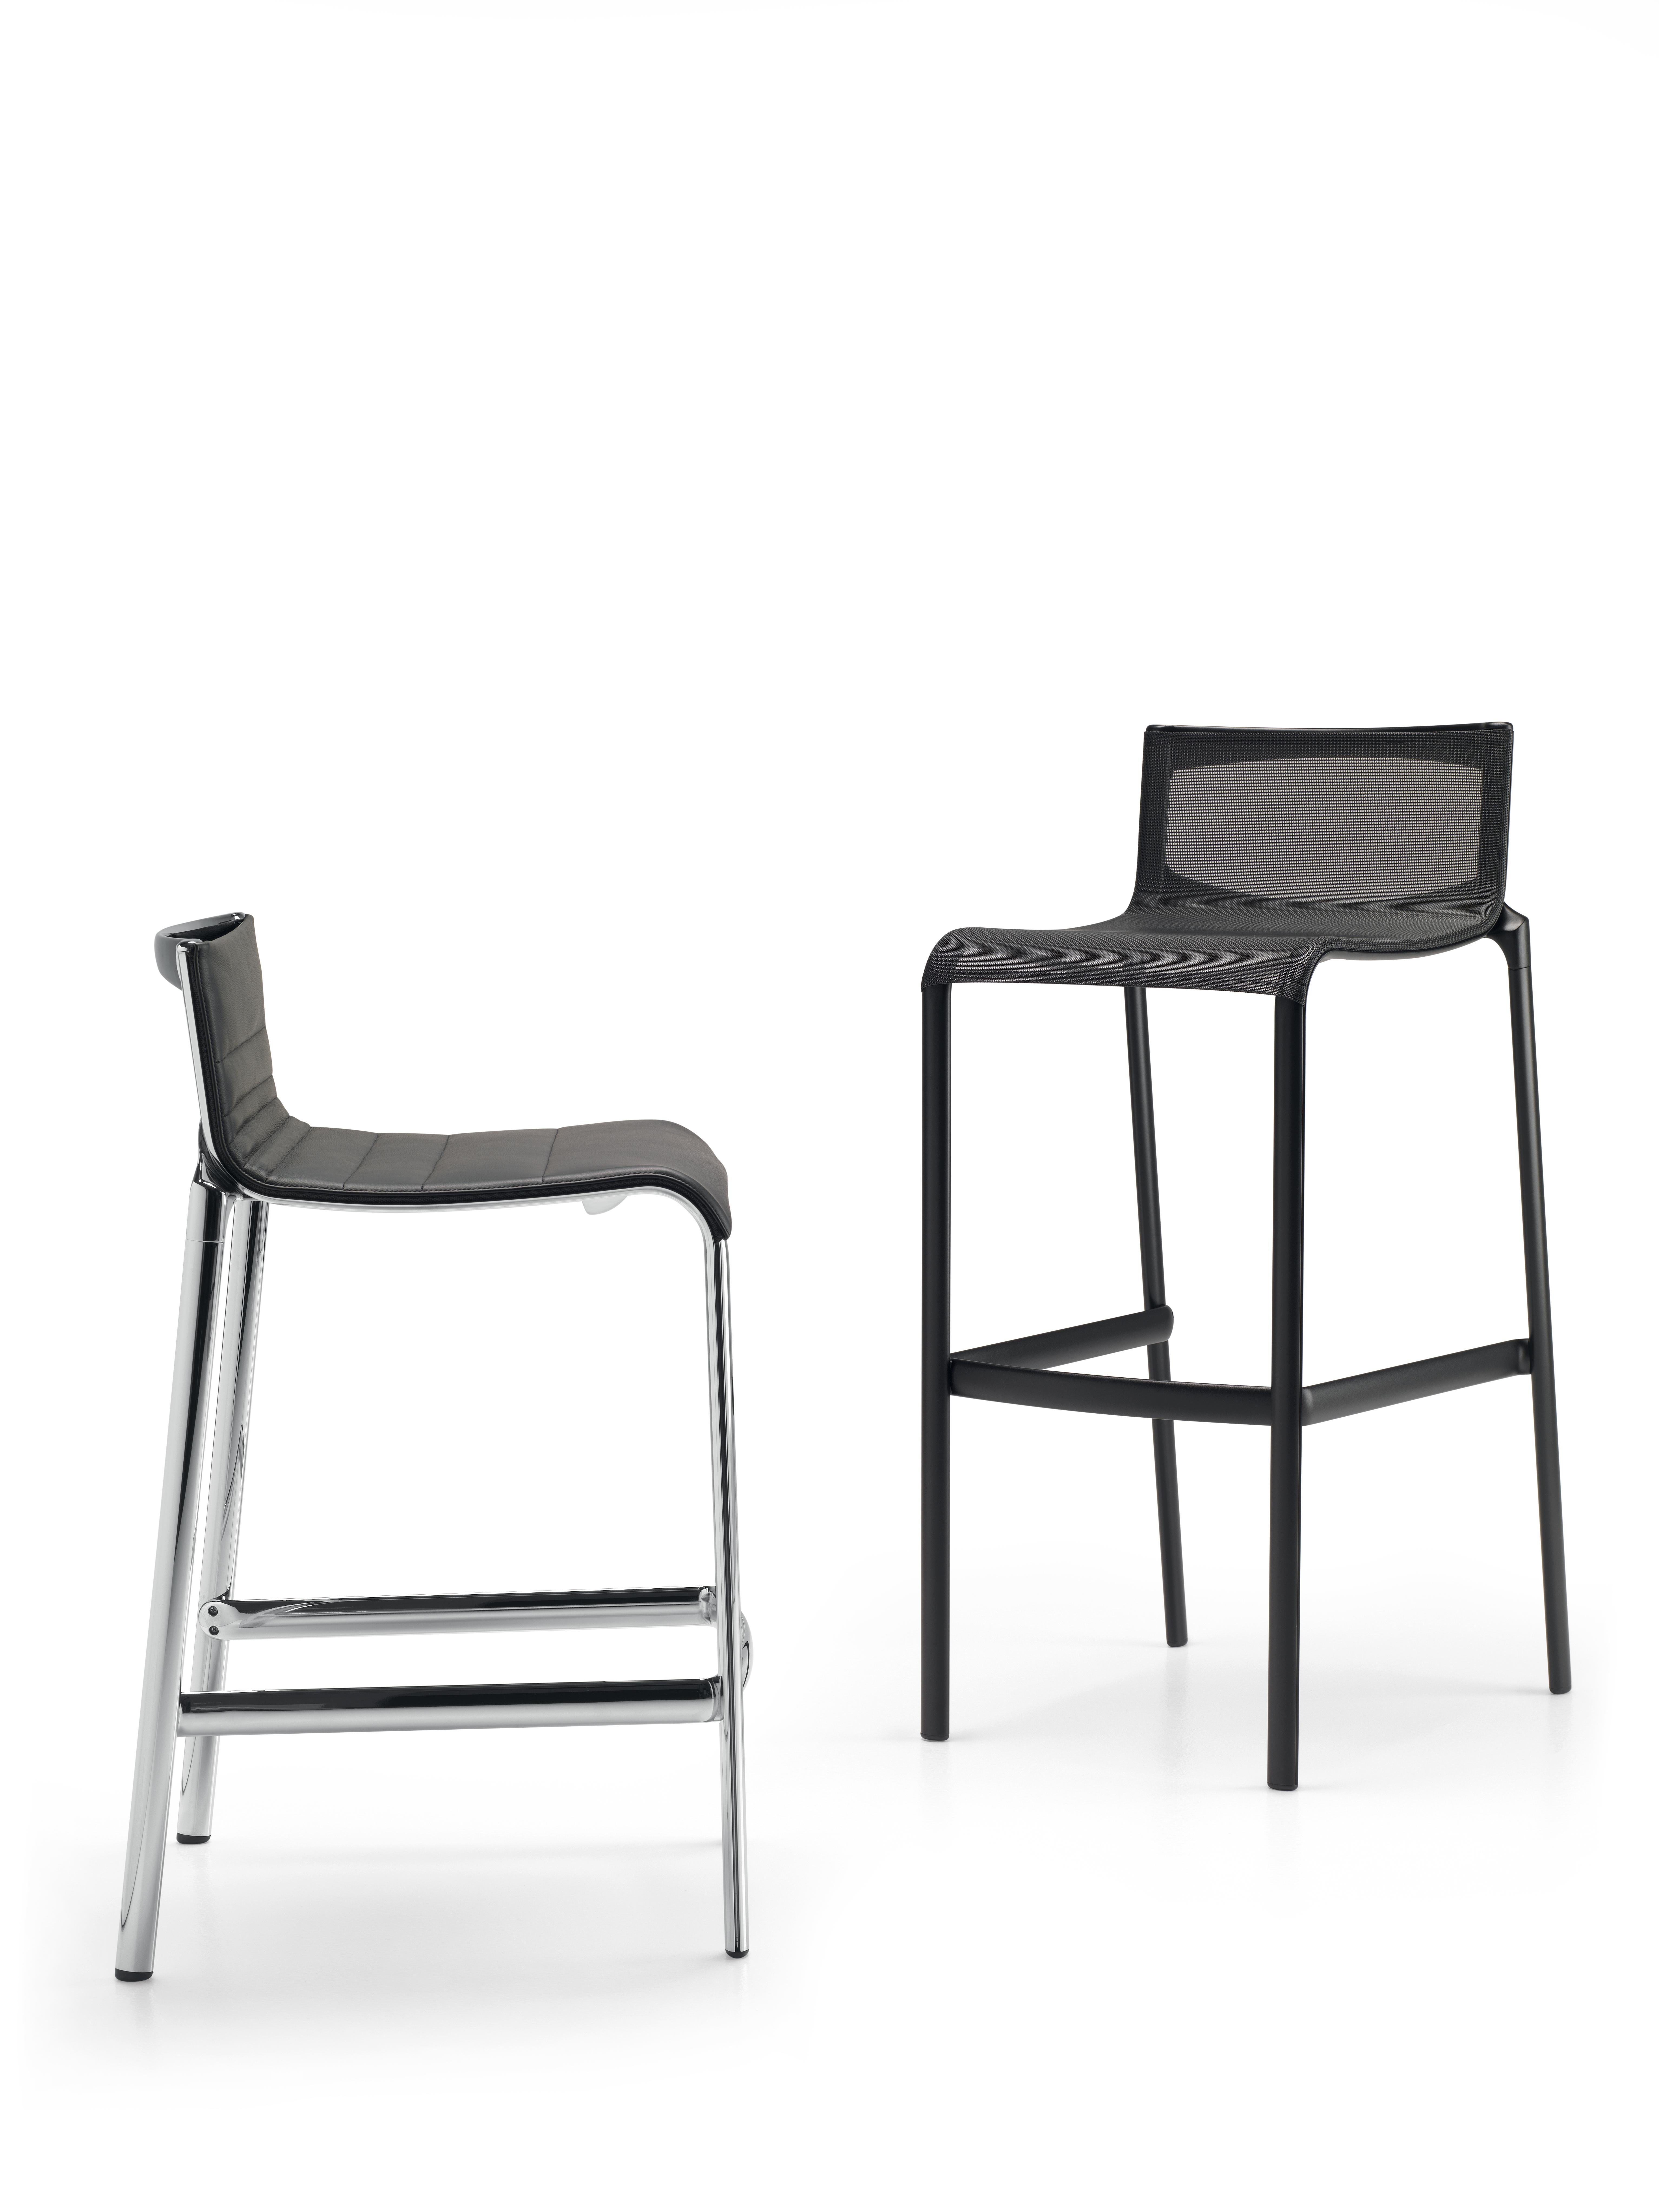 Alias Frame 41A Stool in Black Upholstery with Black Lacquered Aluminium Frame by Alberto Meda

Stool with structure composed of extruded aluminium profile and die-cast aluminium elements, seat and back in fire retardant PVC covered polyester mesh